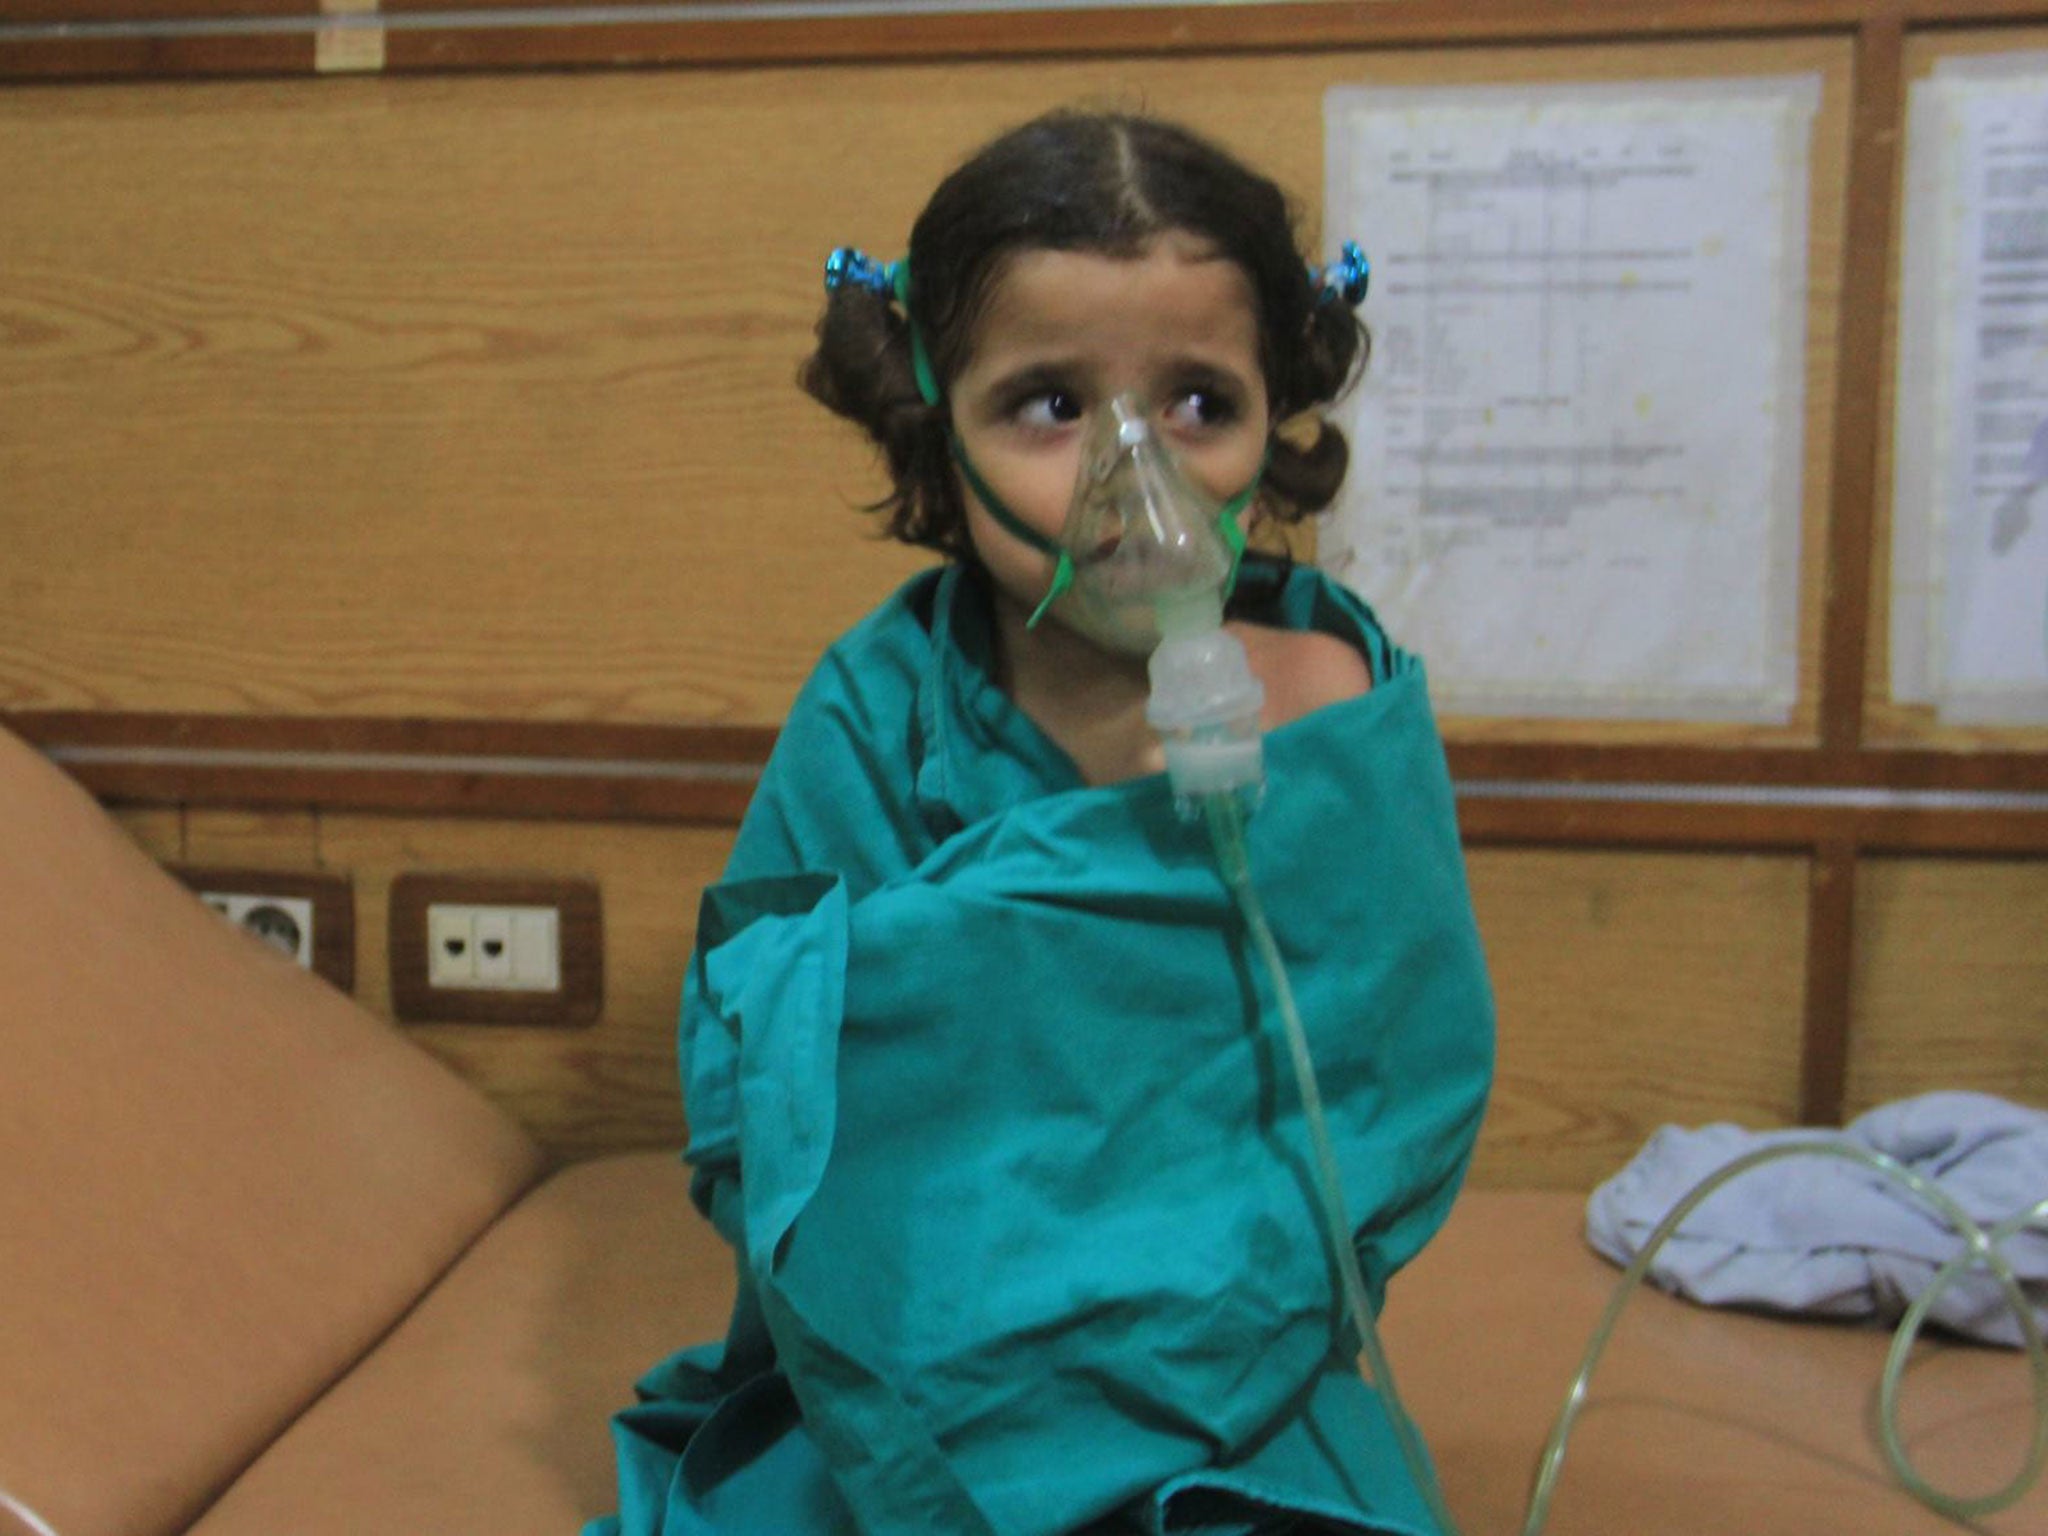 &#13;
Children were given emergency treatment and oxygen masks after a suspected gas attack in Aleppo on Thursday &#13;